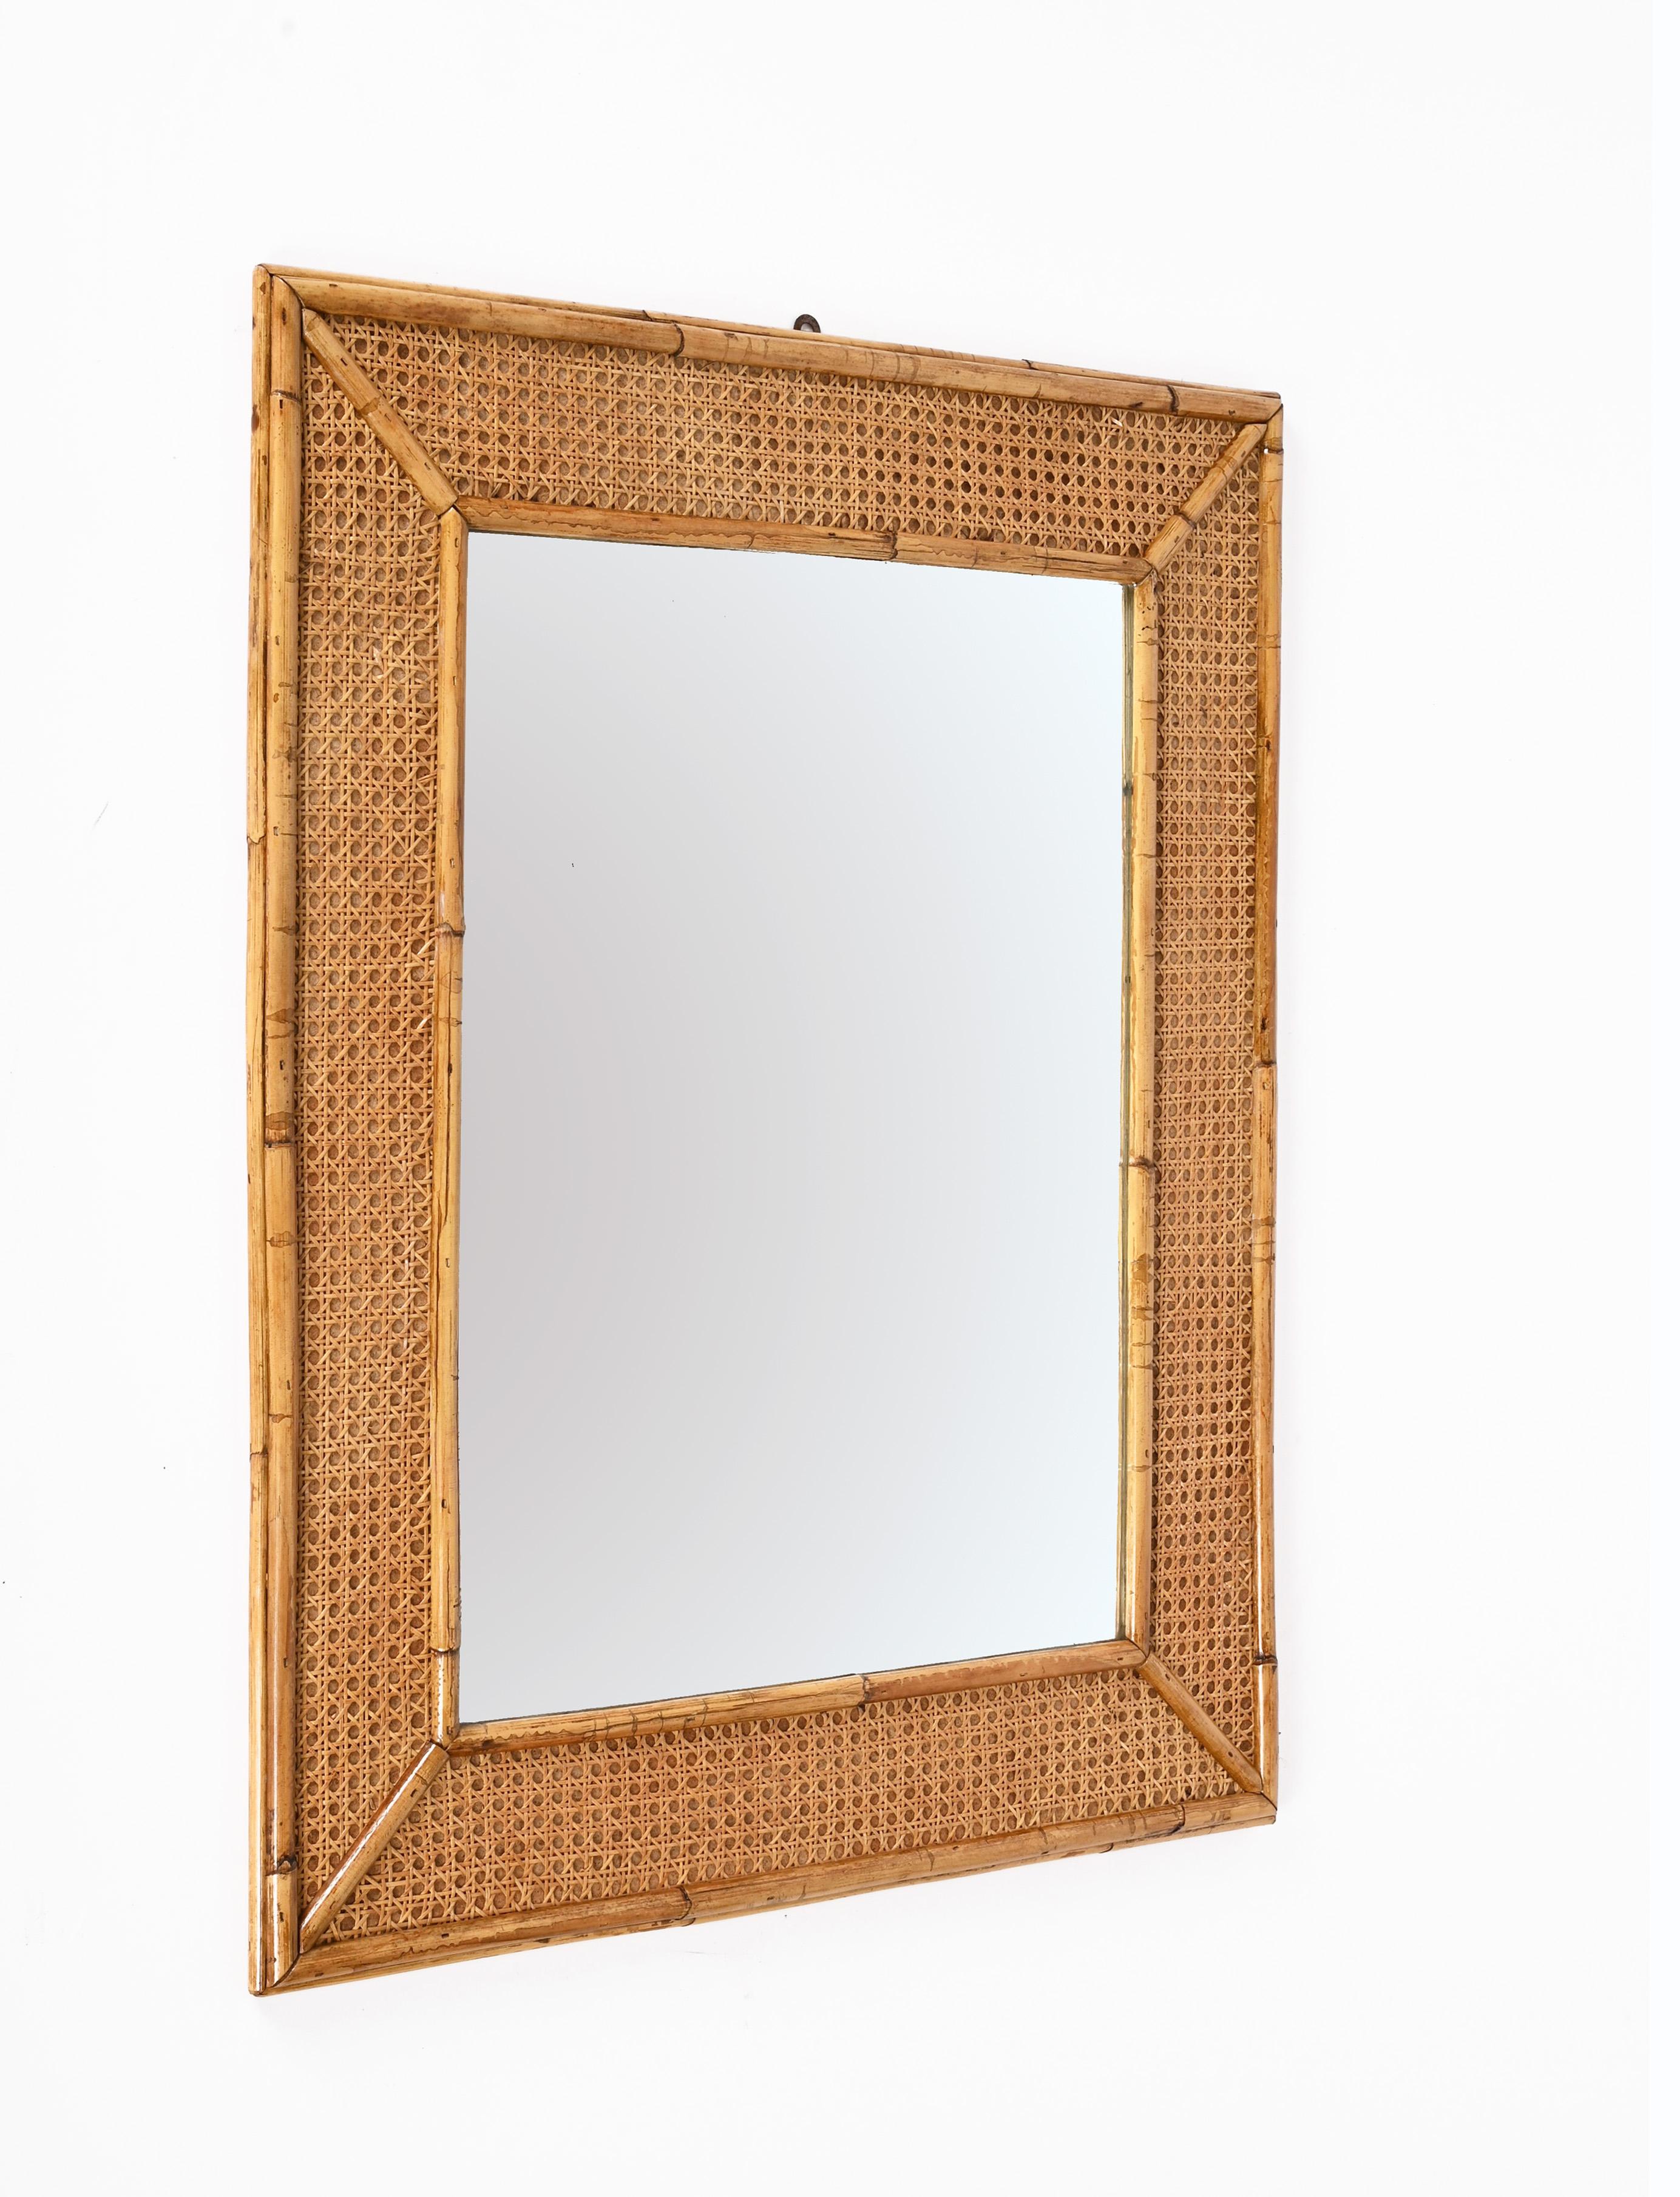 Midcentury Rectangular Italian Mirror with Bamboo and Vienna Straw Frame, 1970s For Sale 9